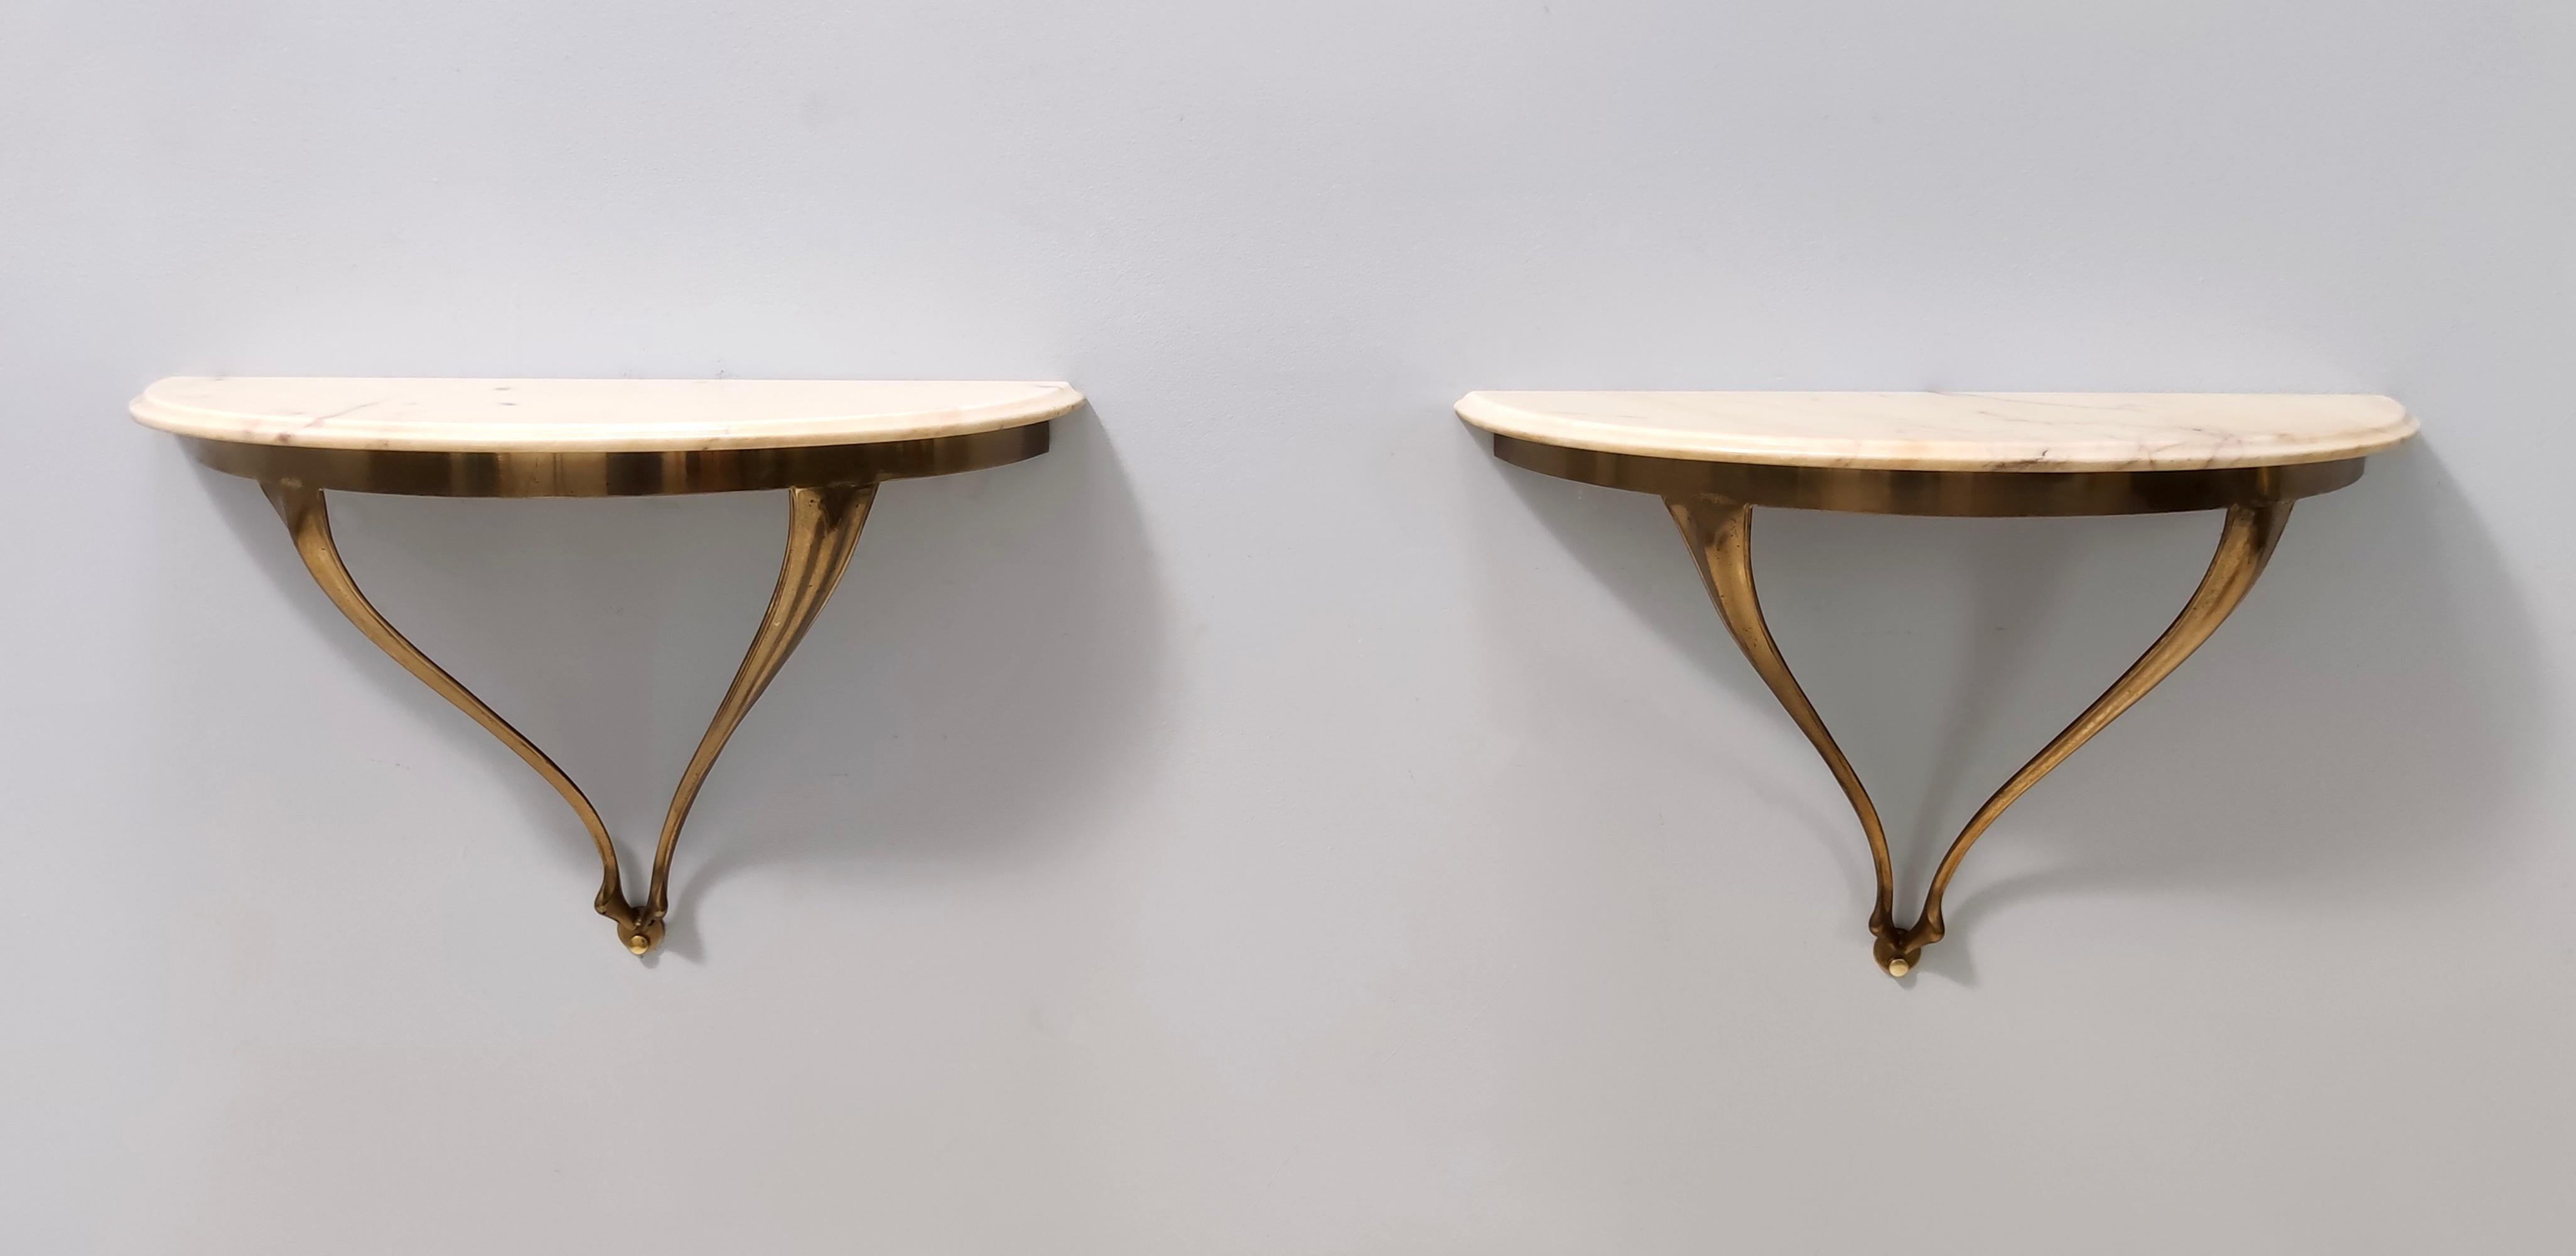 Wall-Mounted Brass Nightstands with Demilune Marble Top Ascribable to Ulrich In Excellent Condition In Bresso, Lombardy